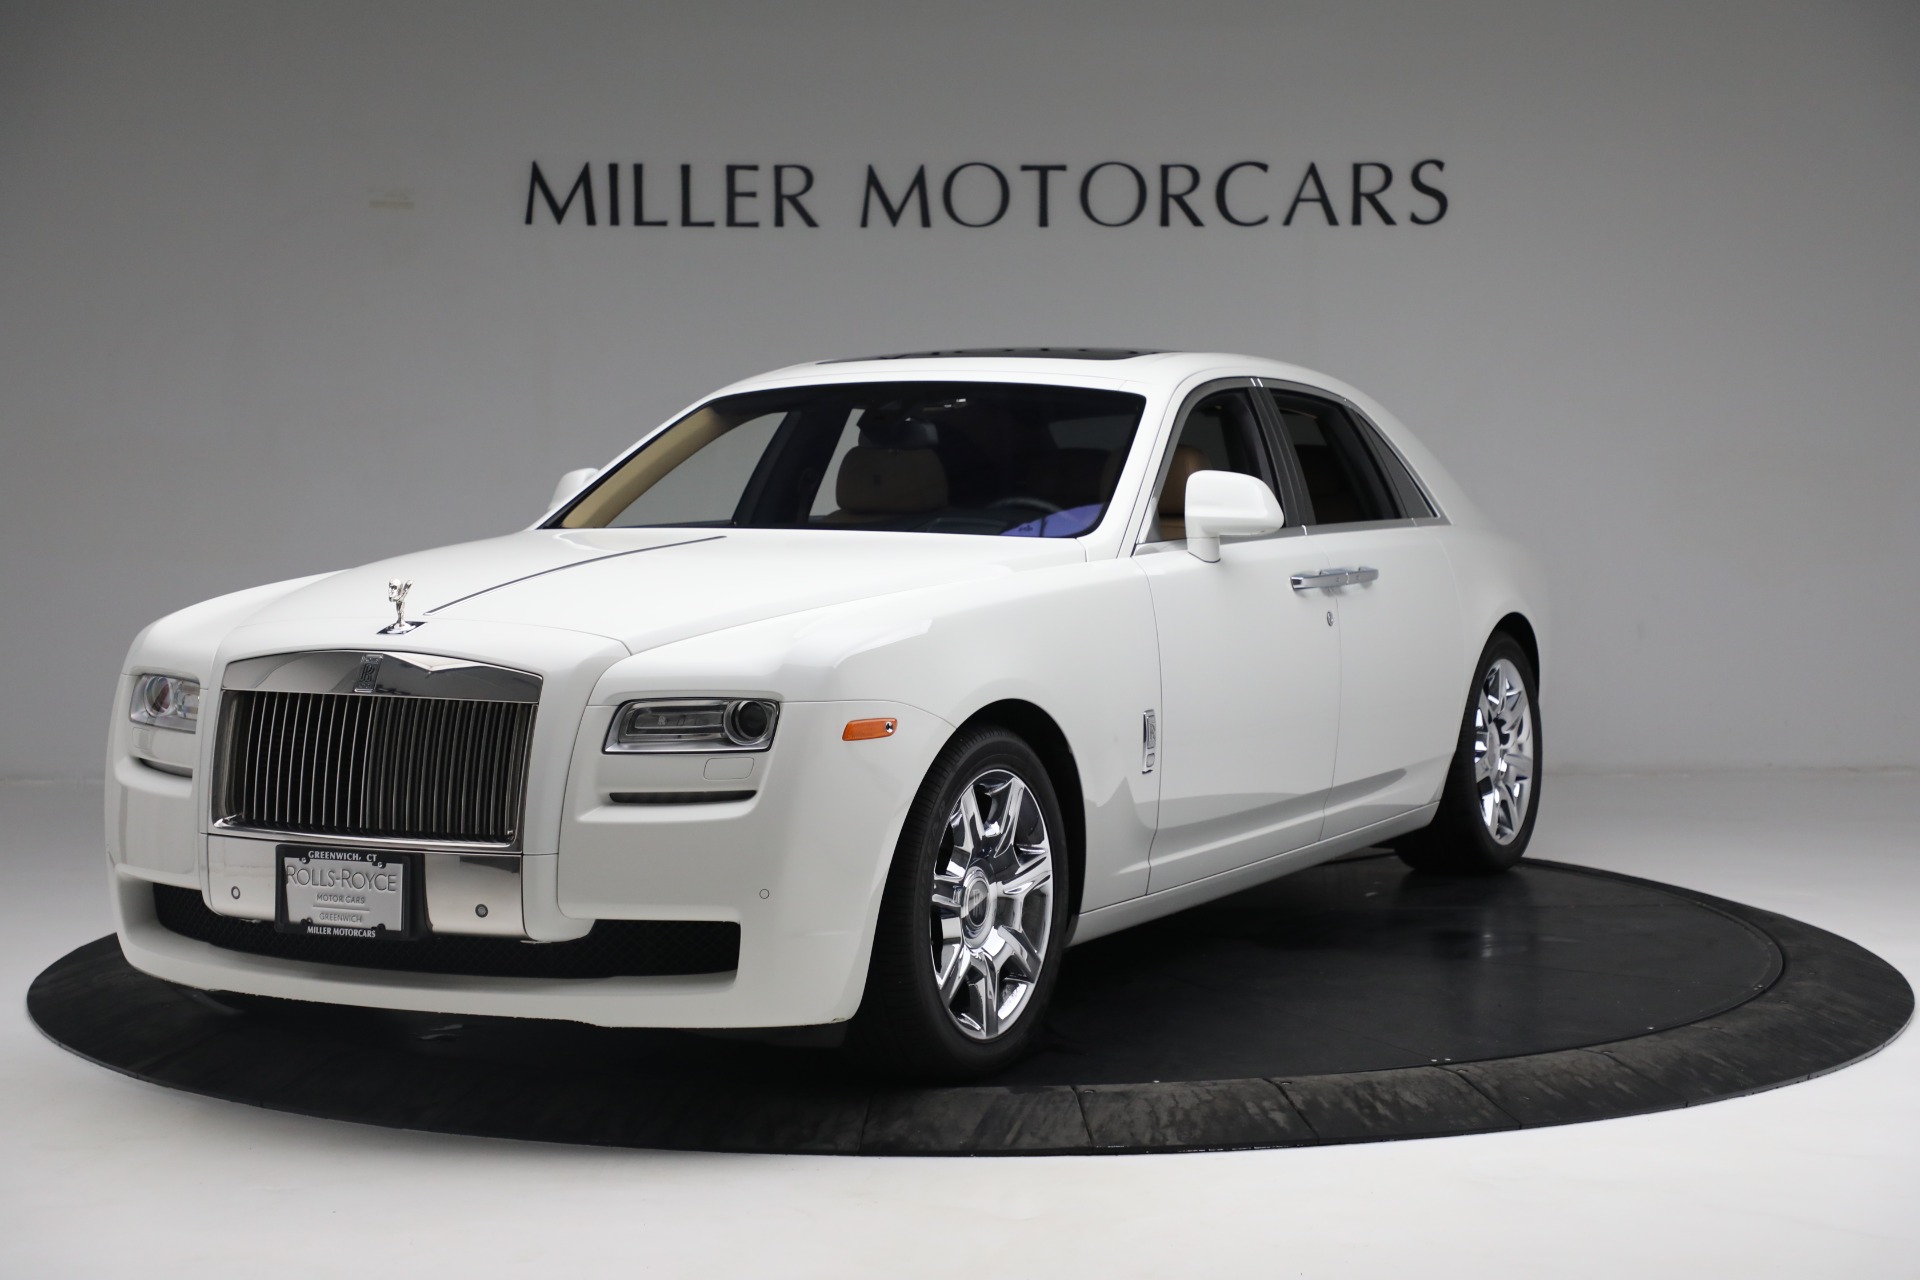 Used 2013 Rolls-Royce Ghost for sale $159,900 at Bentley Greenwich in Greenwich CT 06830 1